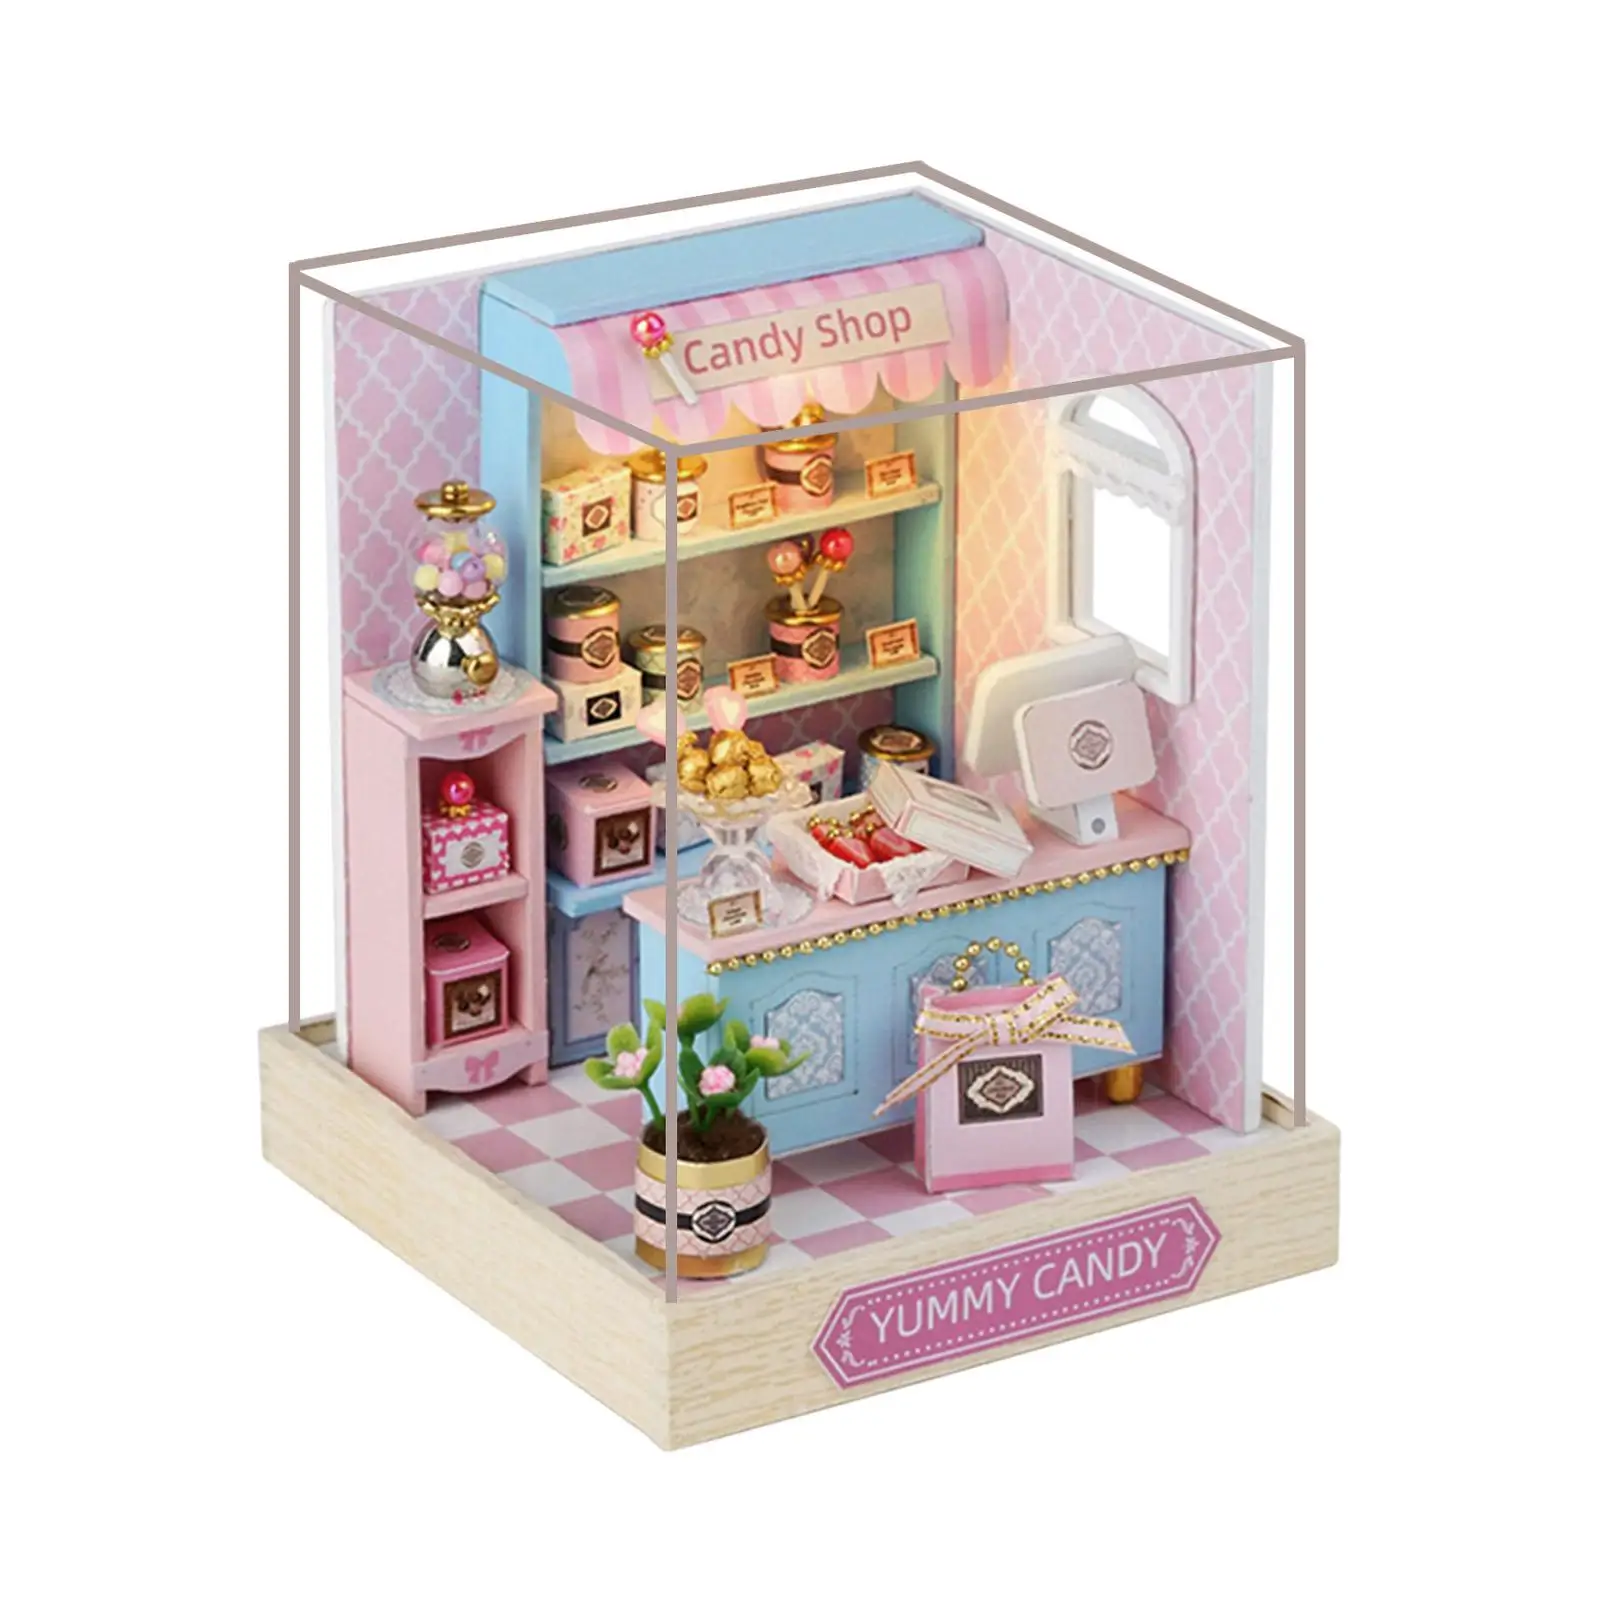 Miniature Dolls House Kits Home Decor Woodcrafts Toys Mini House Model Wood Doll House Model with Accessories for Kids Adults